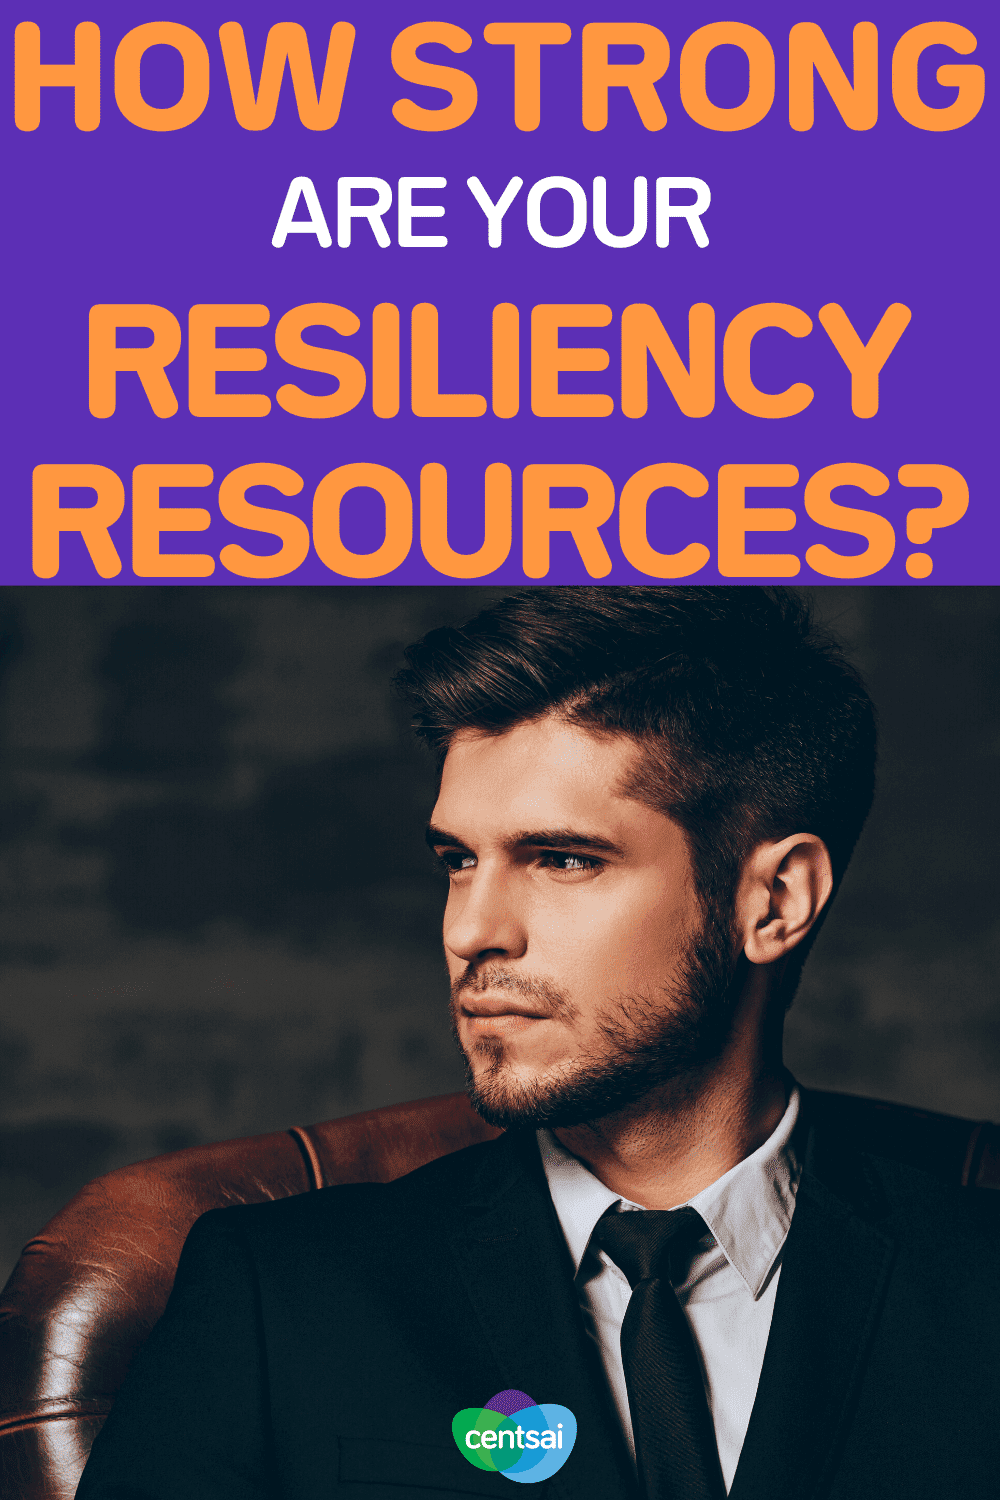 How Strong Are Your Resiliency Resources